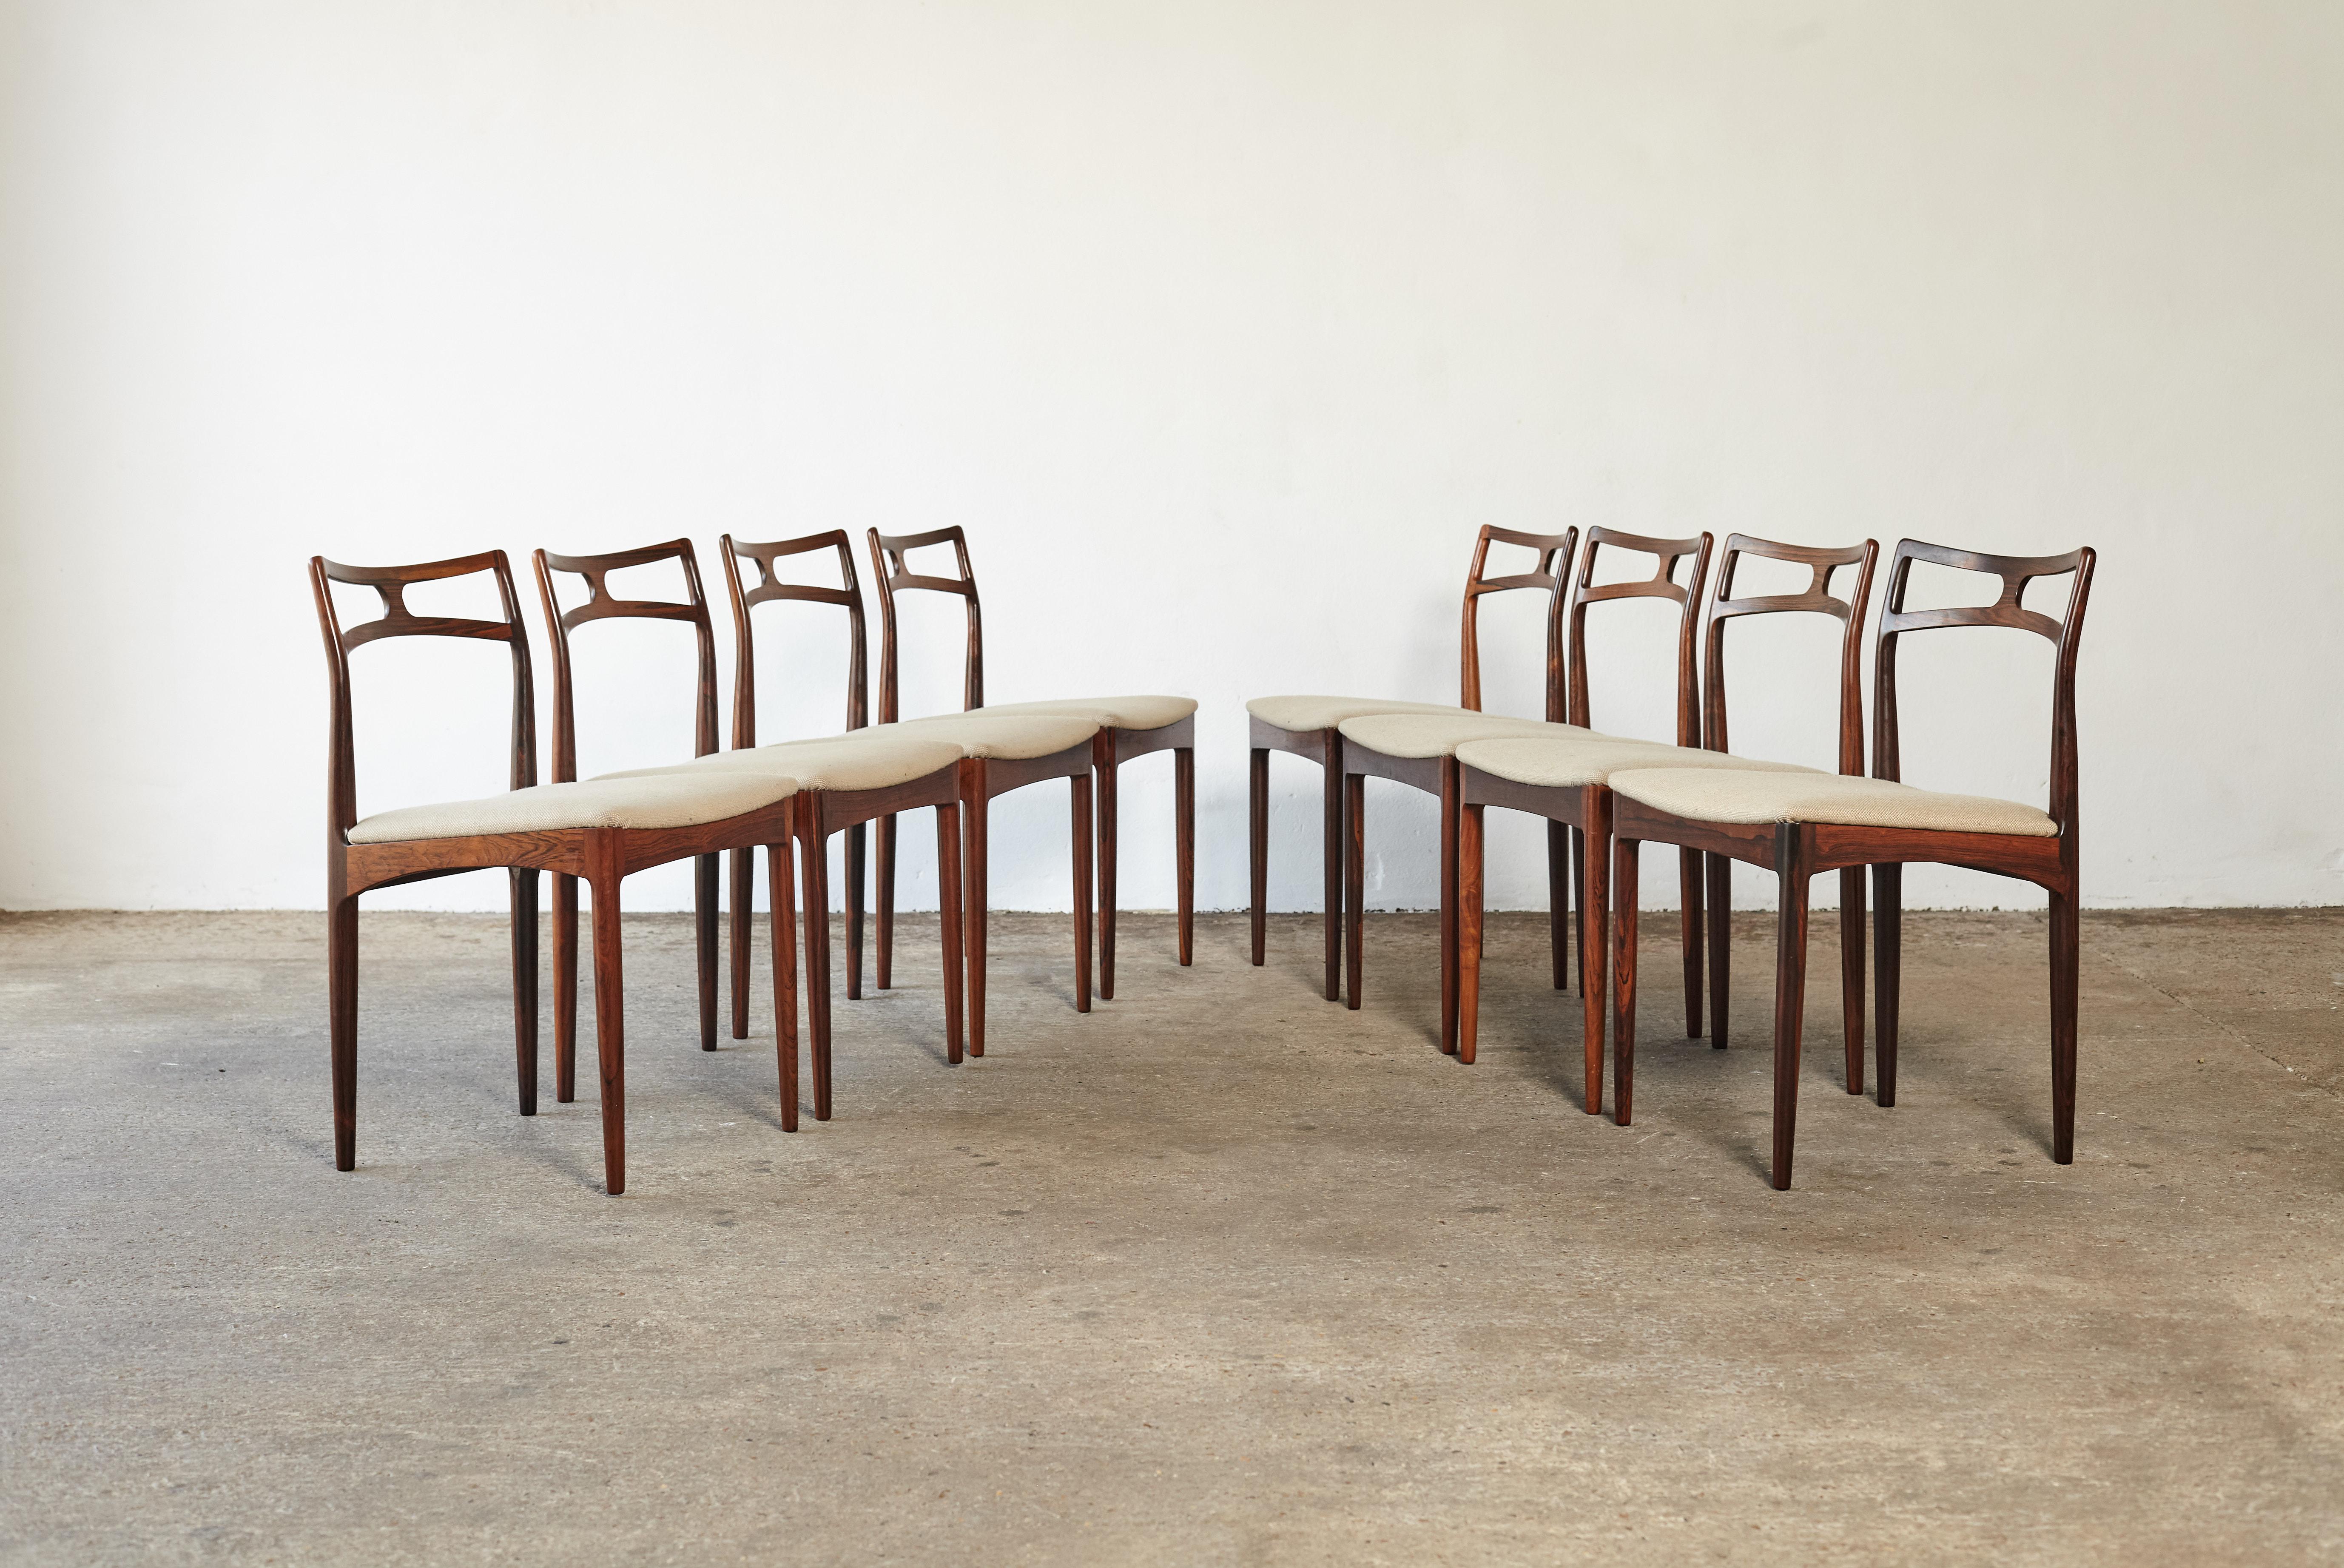 A set of eight Johannes Andersen model 94 rosewood dining chairs, produced by Christian Linneberg, Denmark, 1960s. Original fabric seat covers. Very good vintage condition.